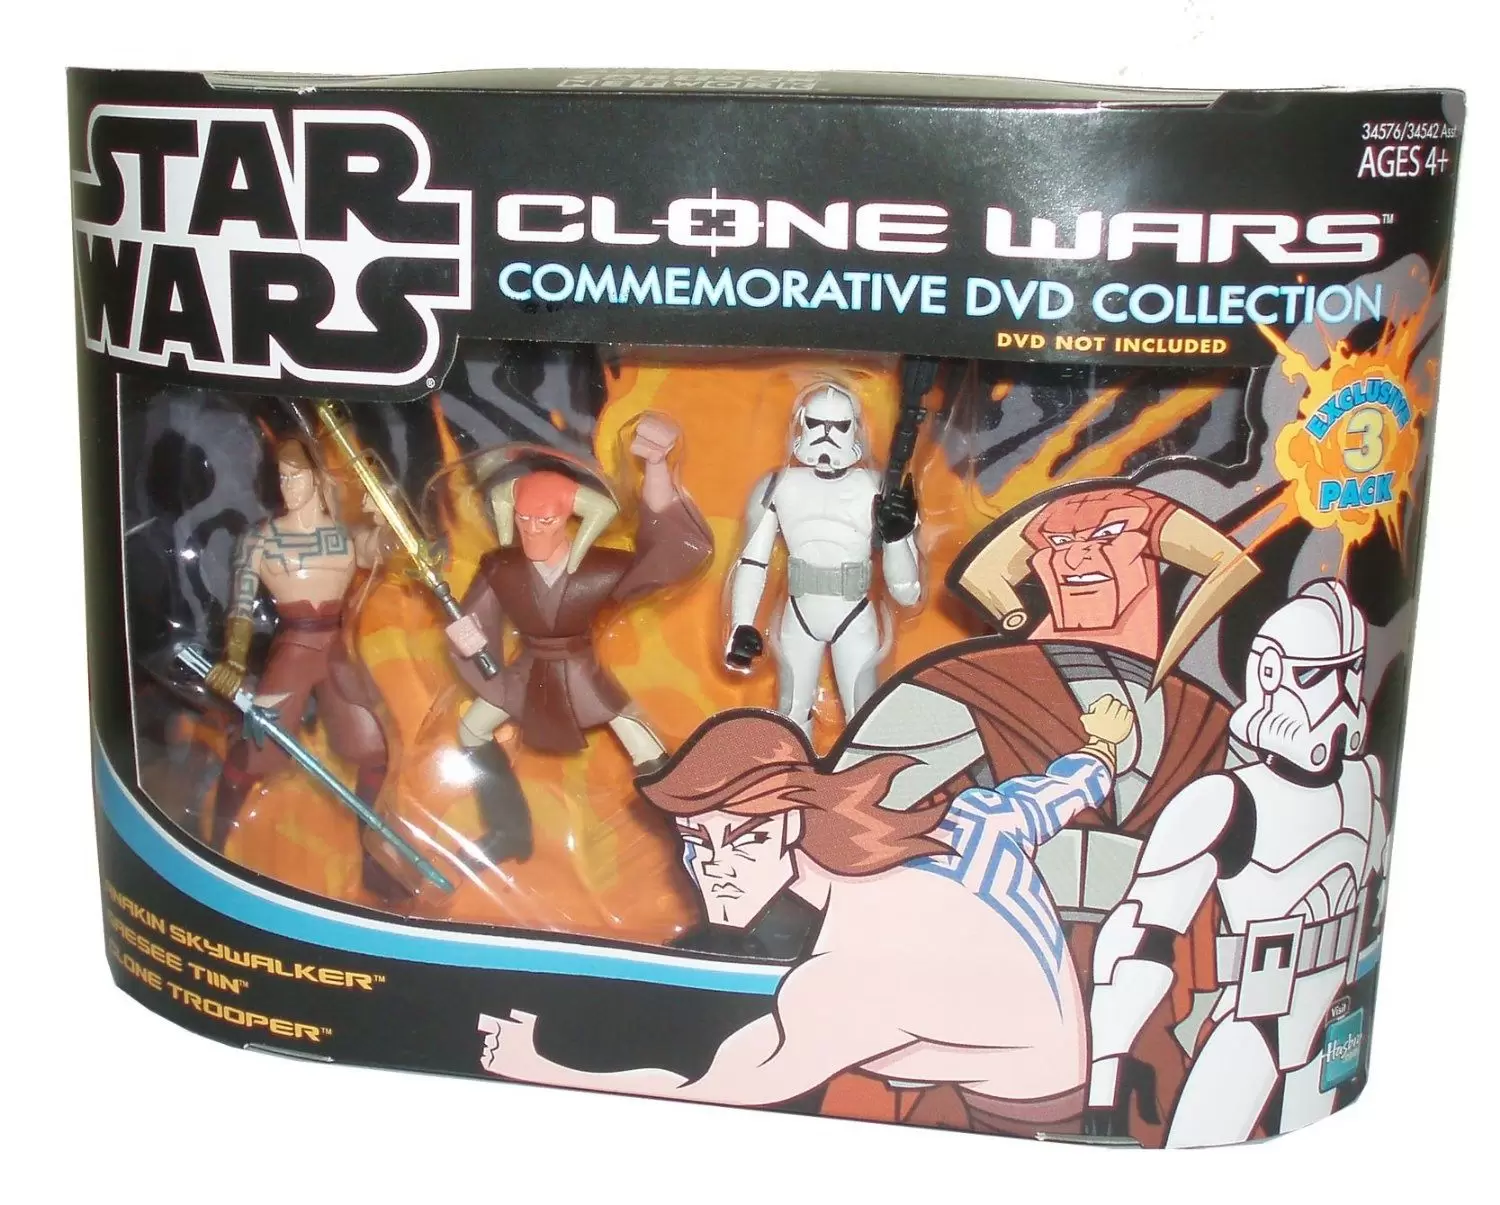 Clone Wars Animated - Commemorative DVD Collection STAR WARS: CLONE WARS Volume 2 Pack 1